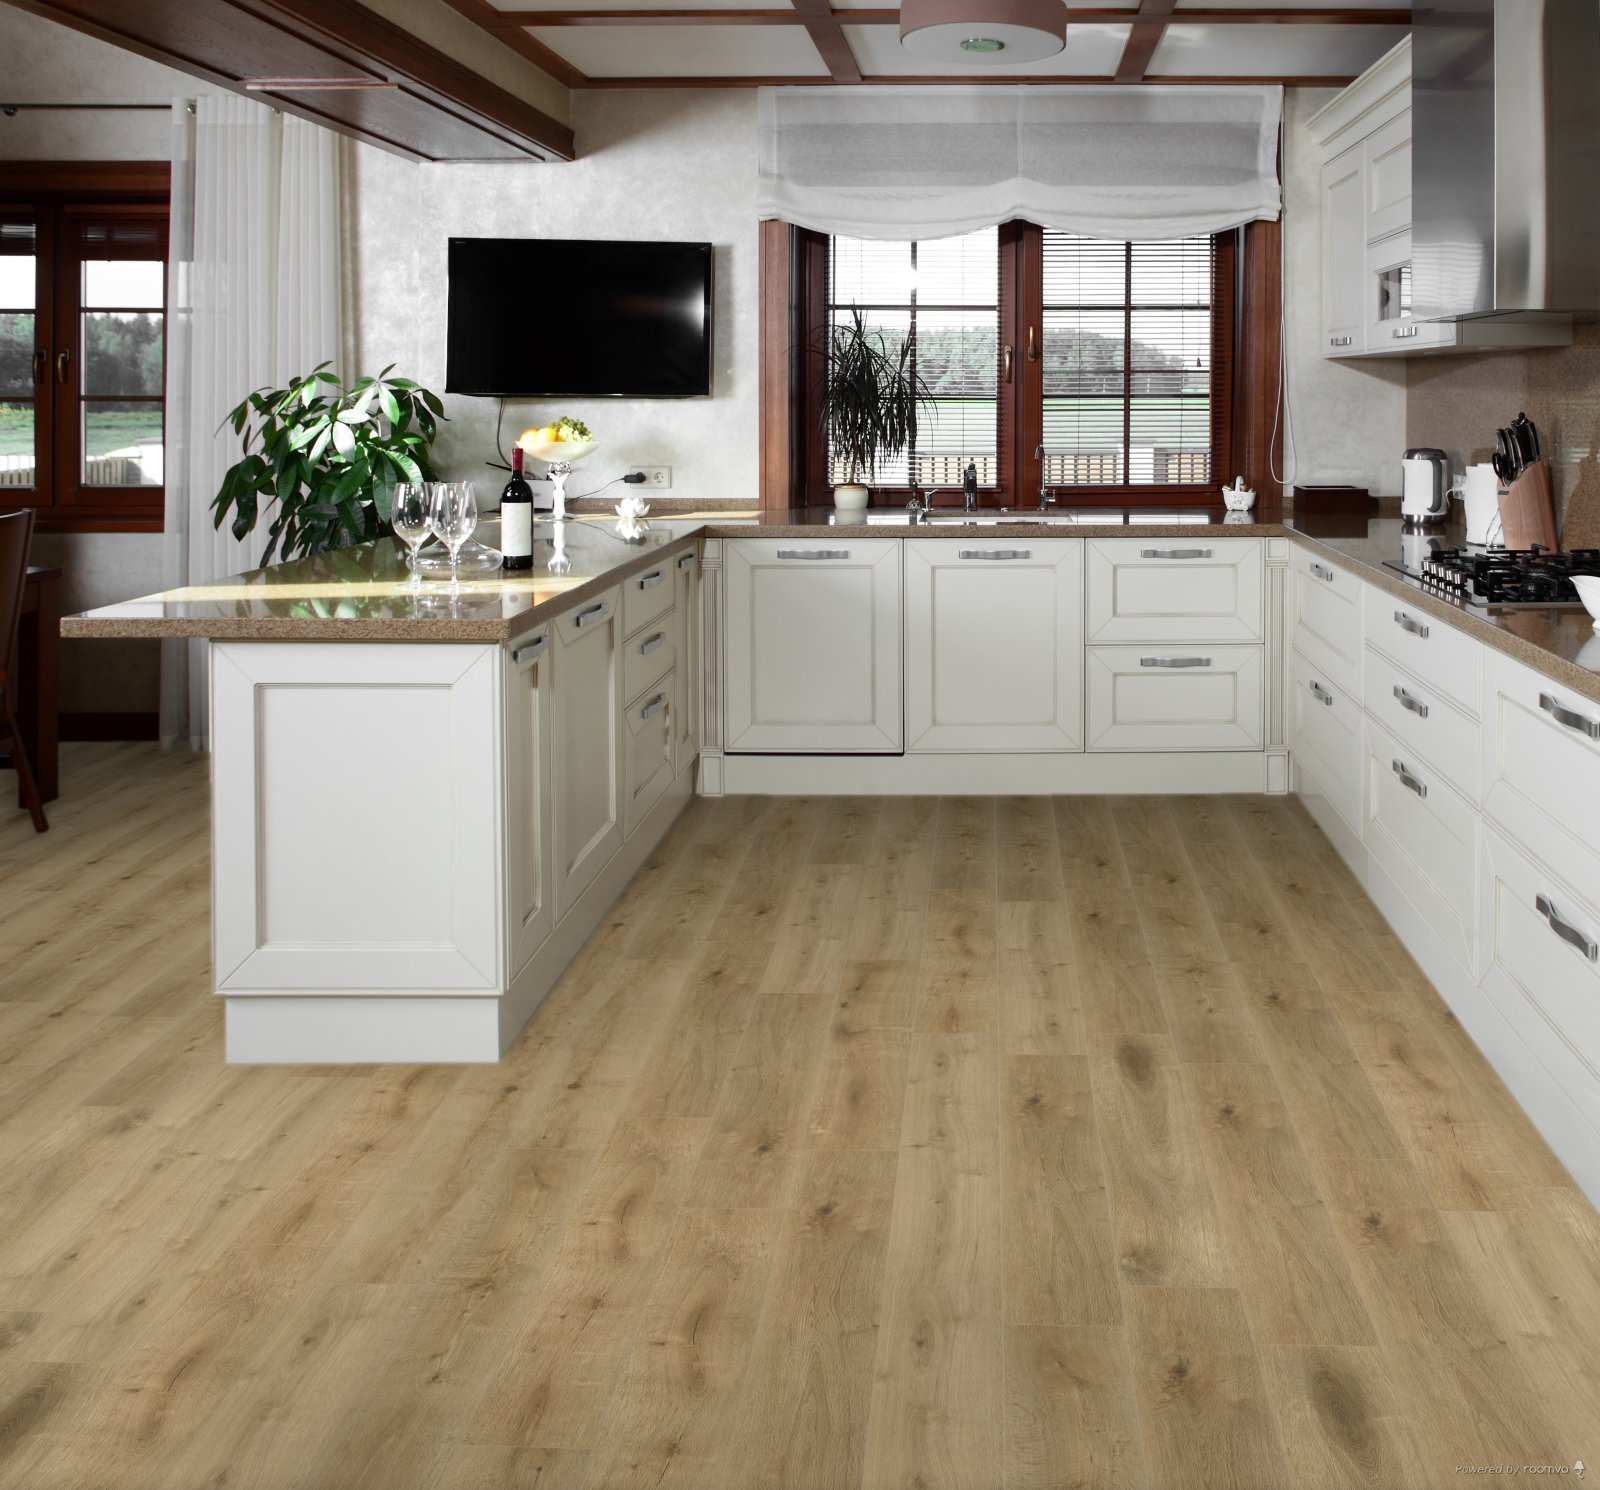 Horizen Flooring presents to you a picture of a quality wide plank Hood River luxury vinyl plank. NovoCore Q Merengue collection features a wide range of colors & designs that will compliment any interior. Natural wood grain synchronized surface allow for an authentic hardwood look & feel. This collection features a 0.3″ / 7.5 mm overall thickness and a durable 22 mil / 0.55 mm wear layer for residential and commercial applications.